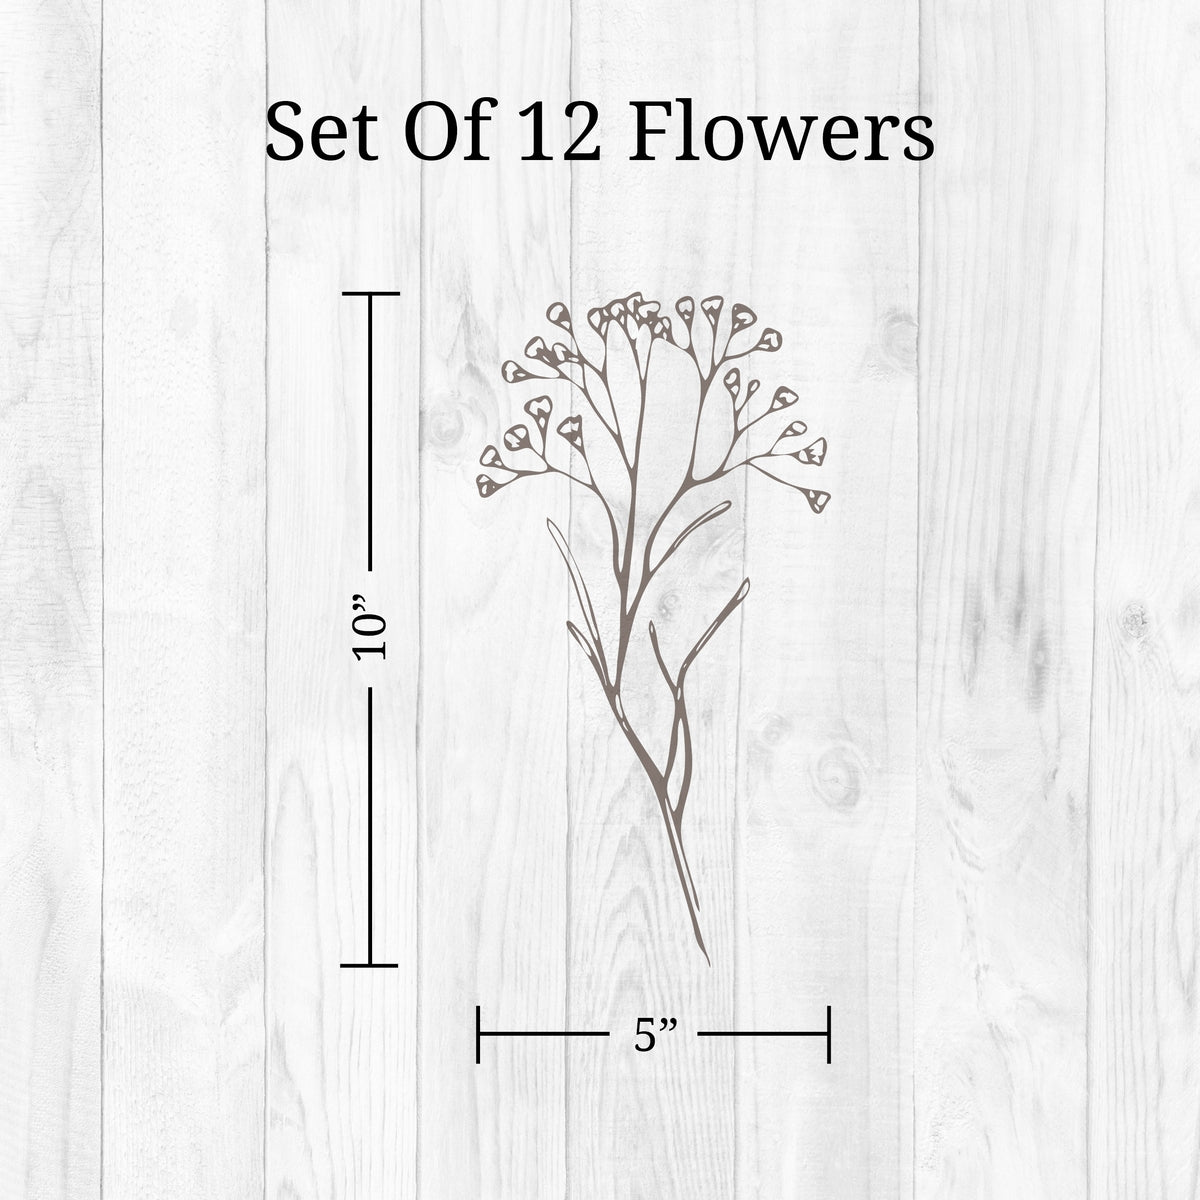 Floral Stems Wall Decals